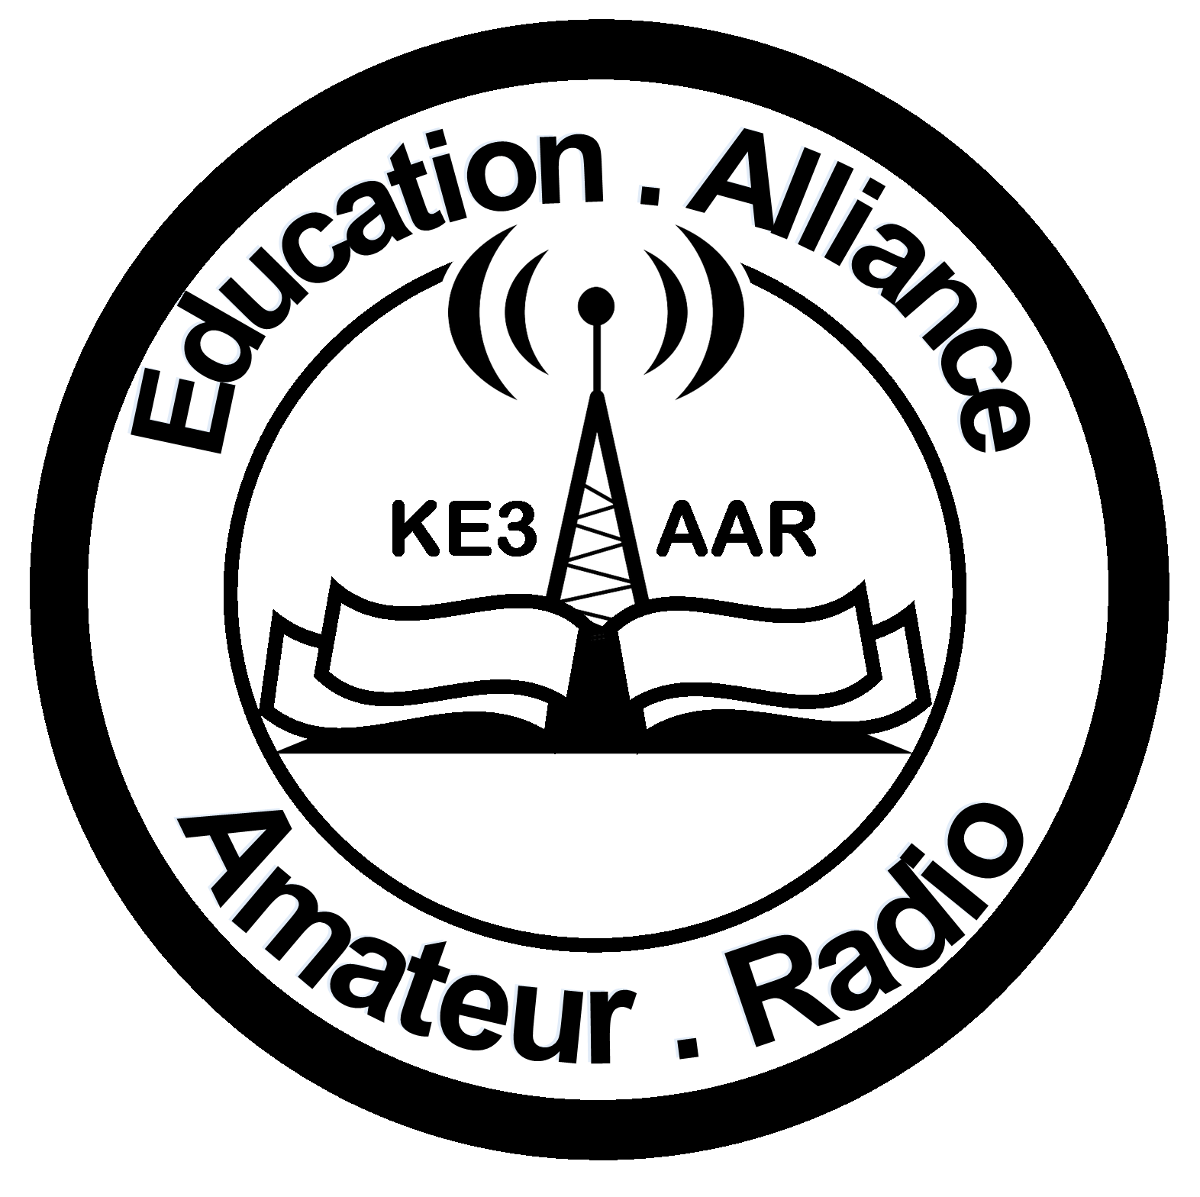 the logo of the Education Alliance for Amateur Radio